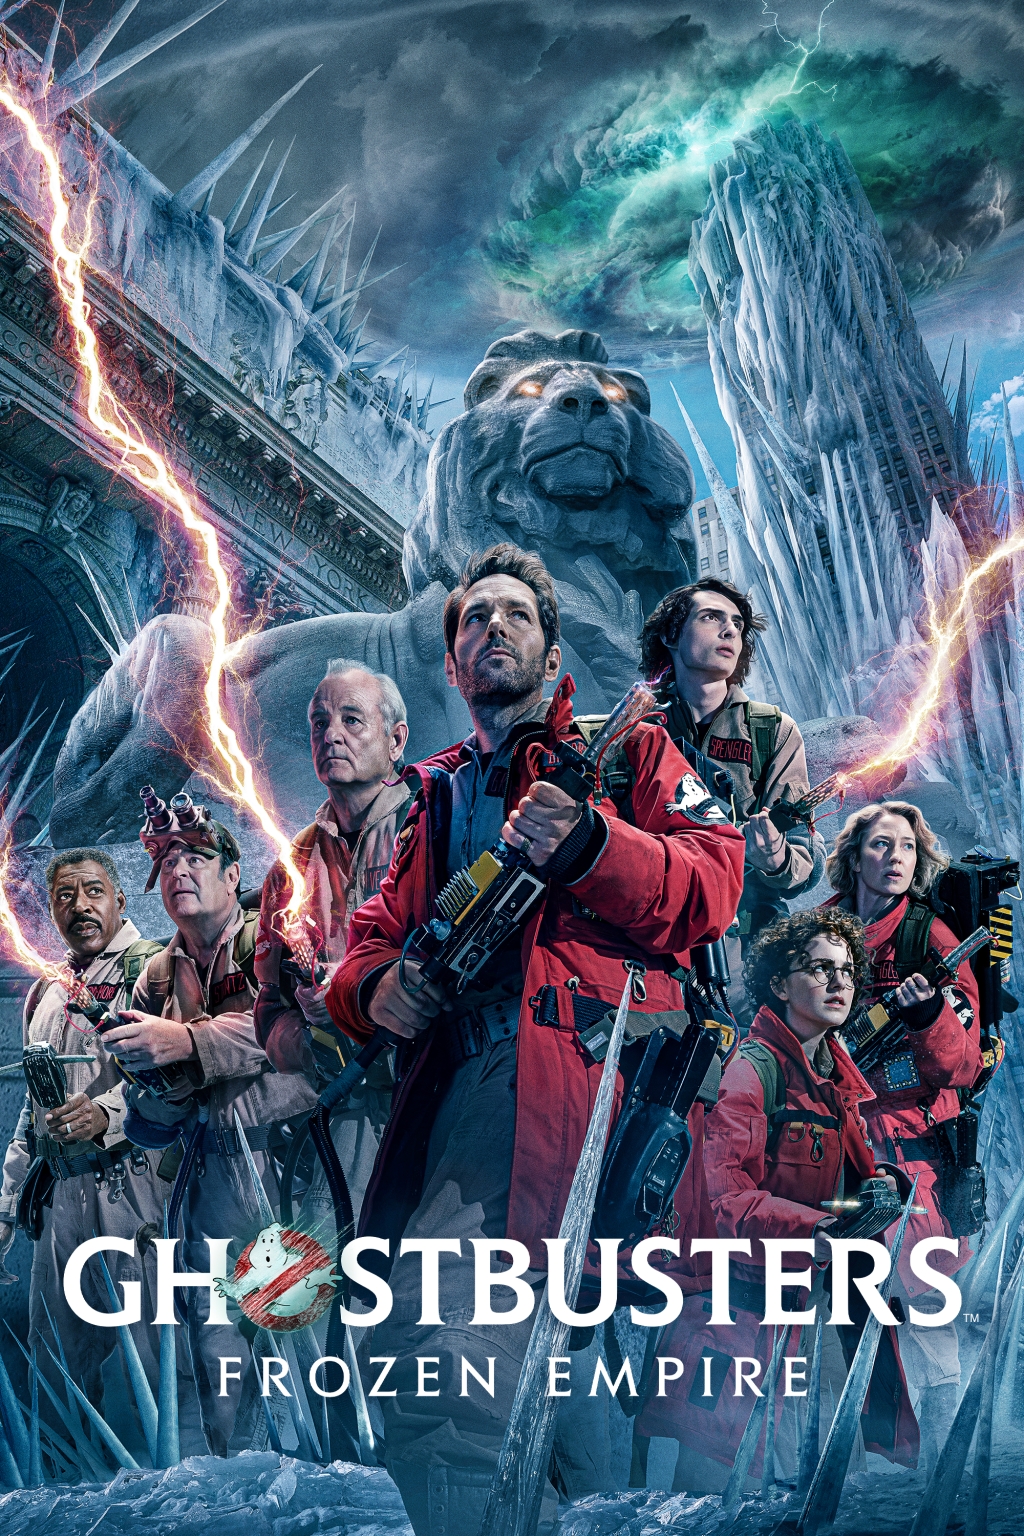 Film Review: Ghostbusters: Frozen Empire